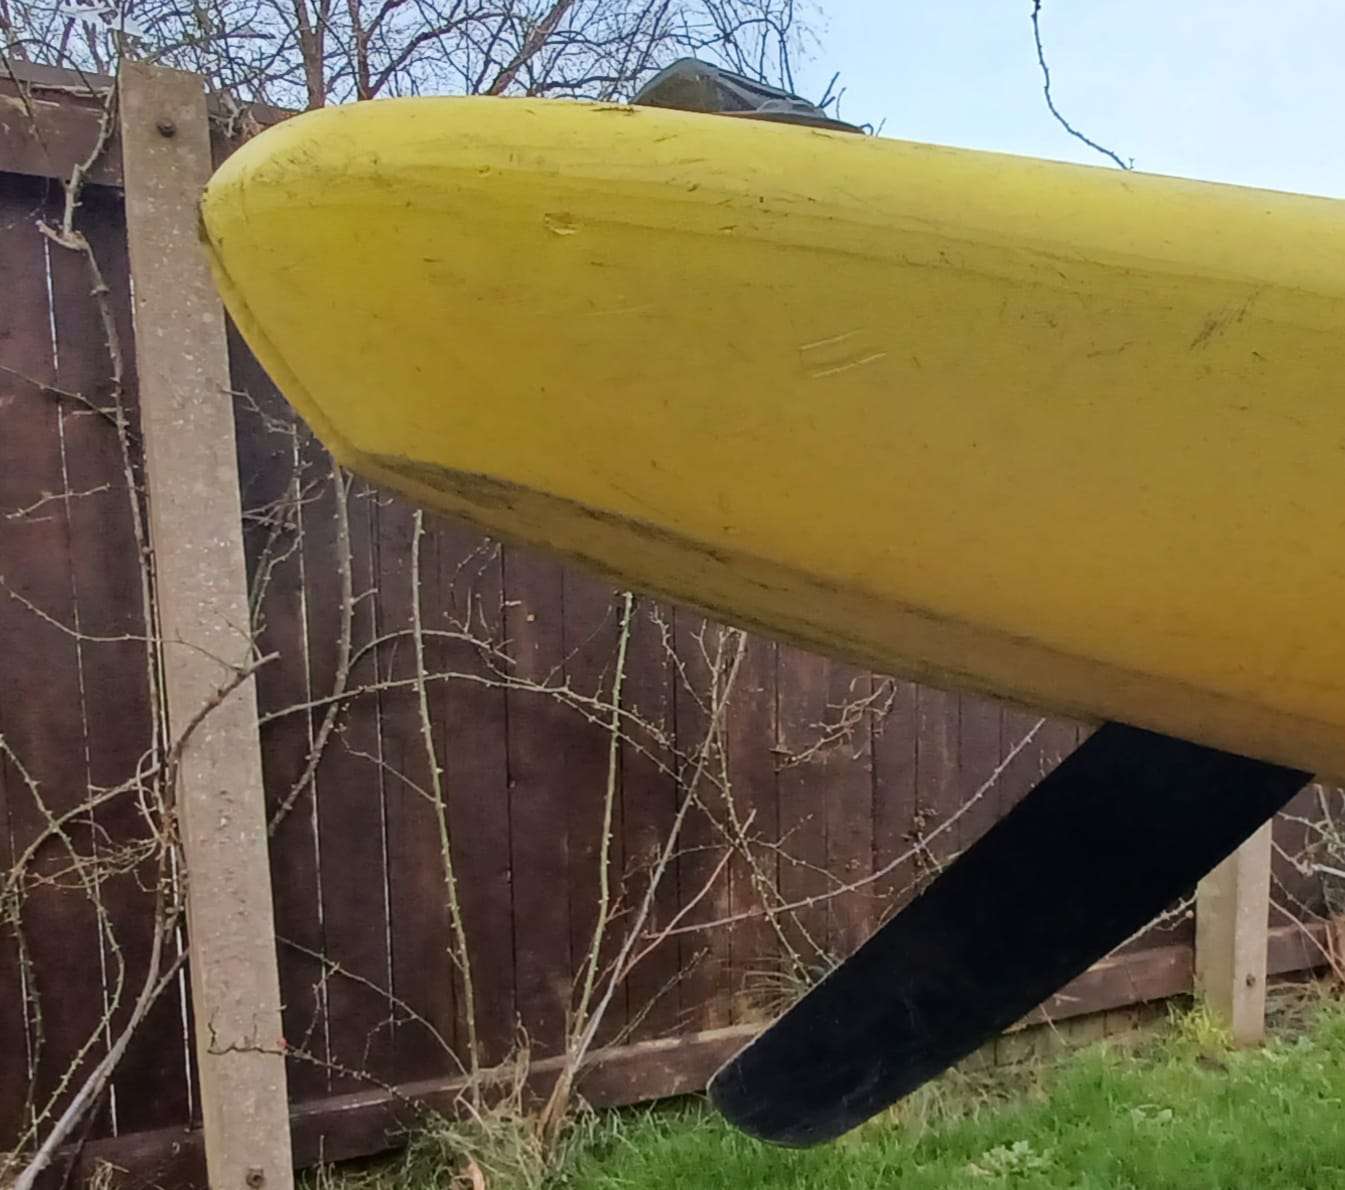 A yellow boat with black propeller

Description automatically generated